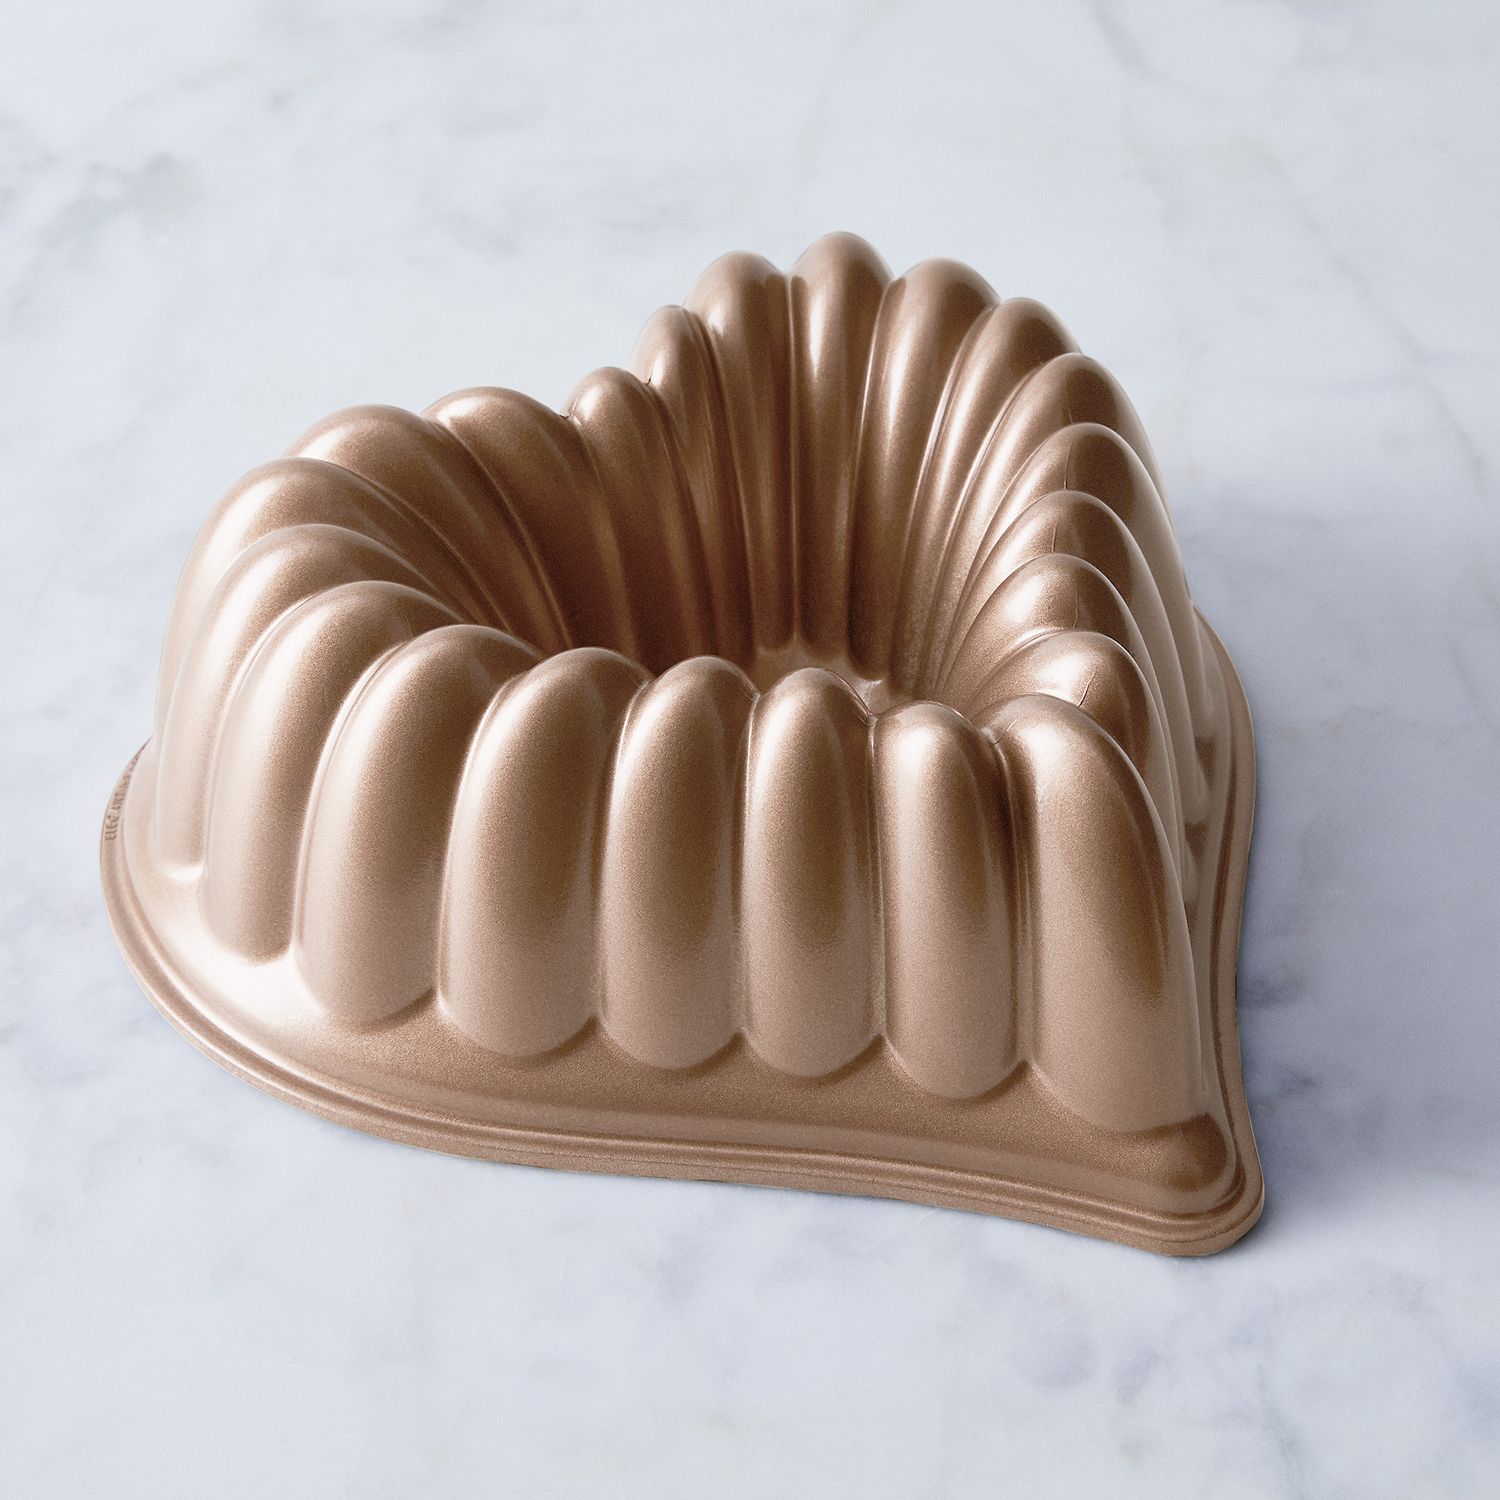 Nordic Ware Baking Pans - Heart of the Home Kitchen